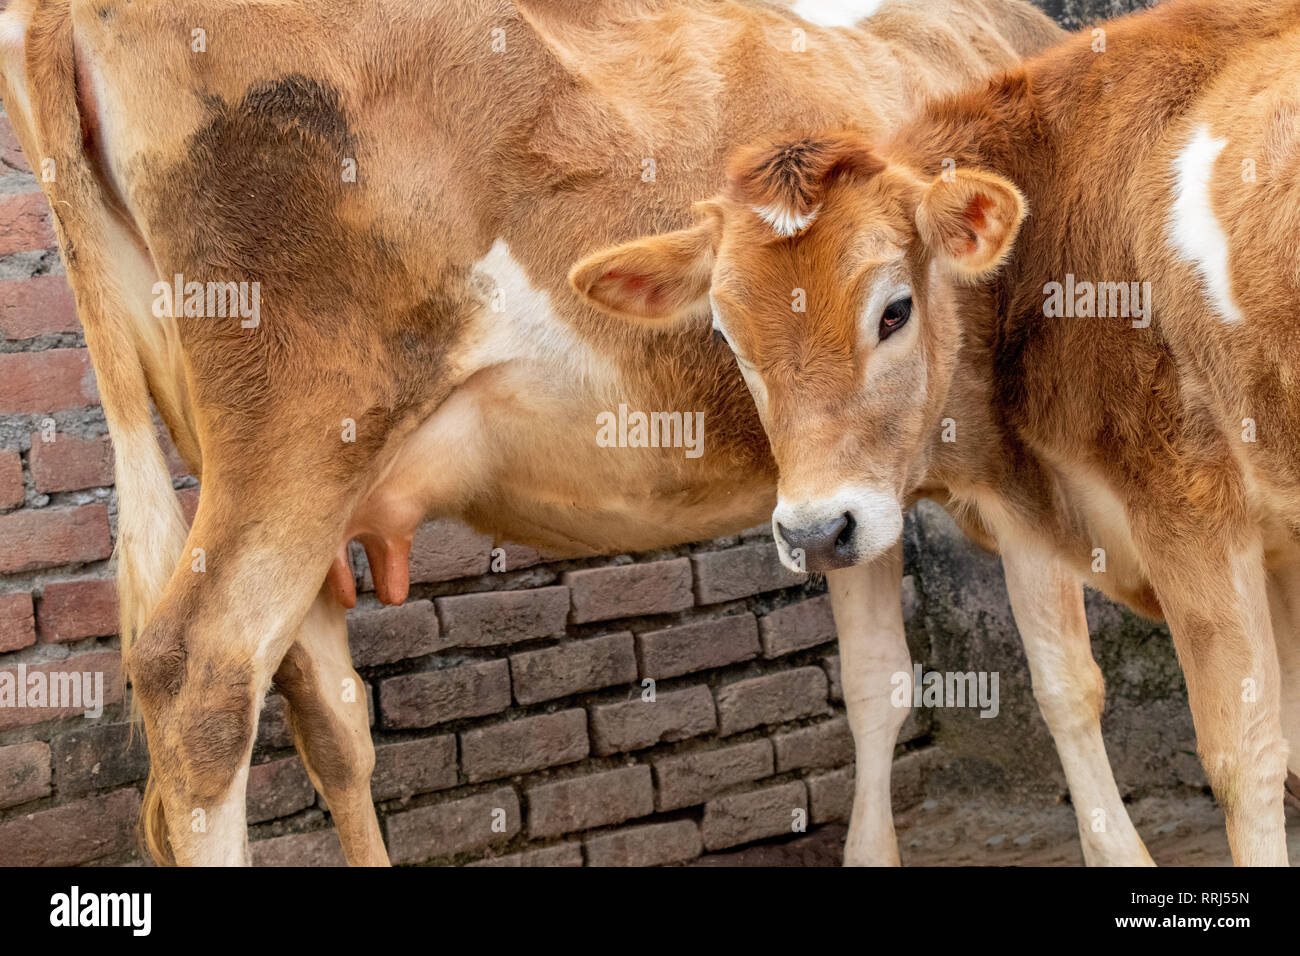 Jersey cow and calf, mother and son standing in stall. Stock Photo